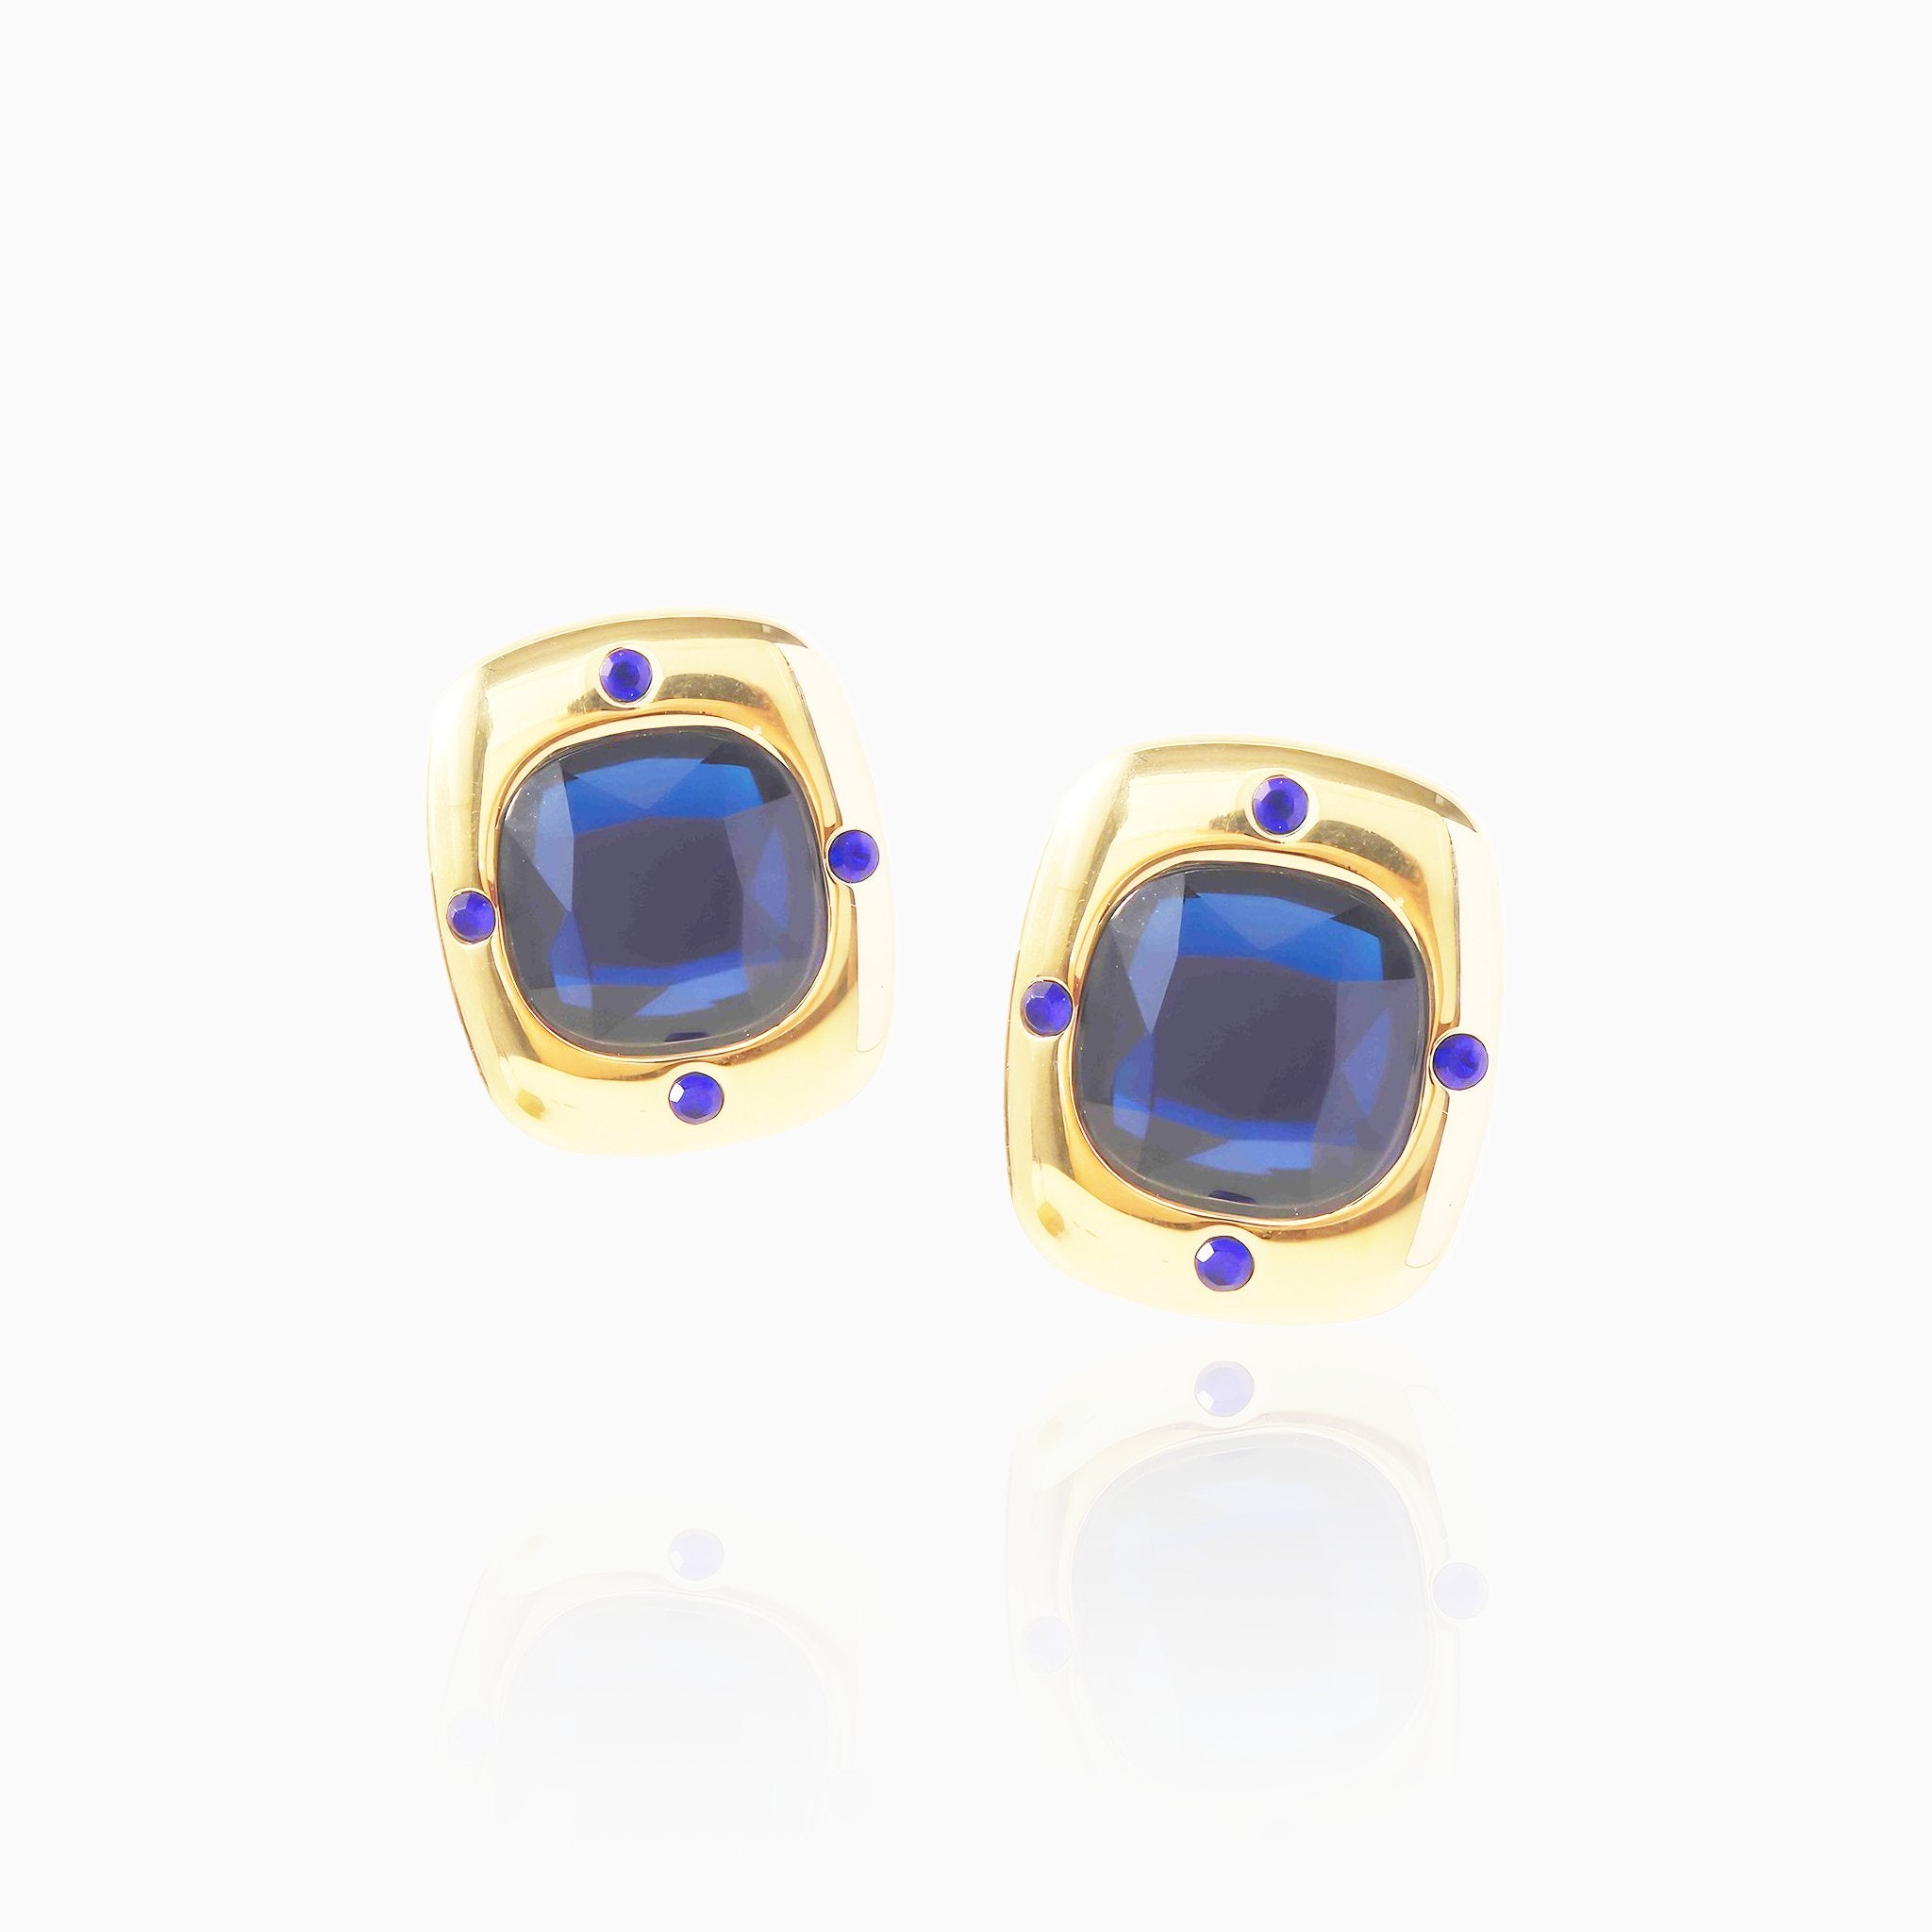 Square Earrings with Royal Blue Gemstones - Nobbier - Earrings - 18K Gold And Titanium PVD Coated Jewelry